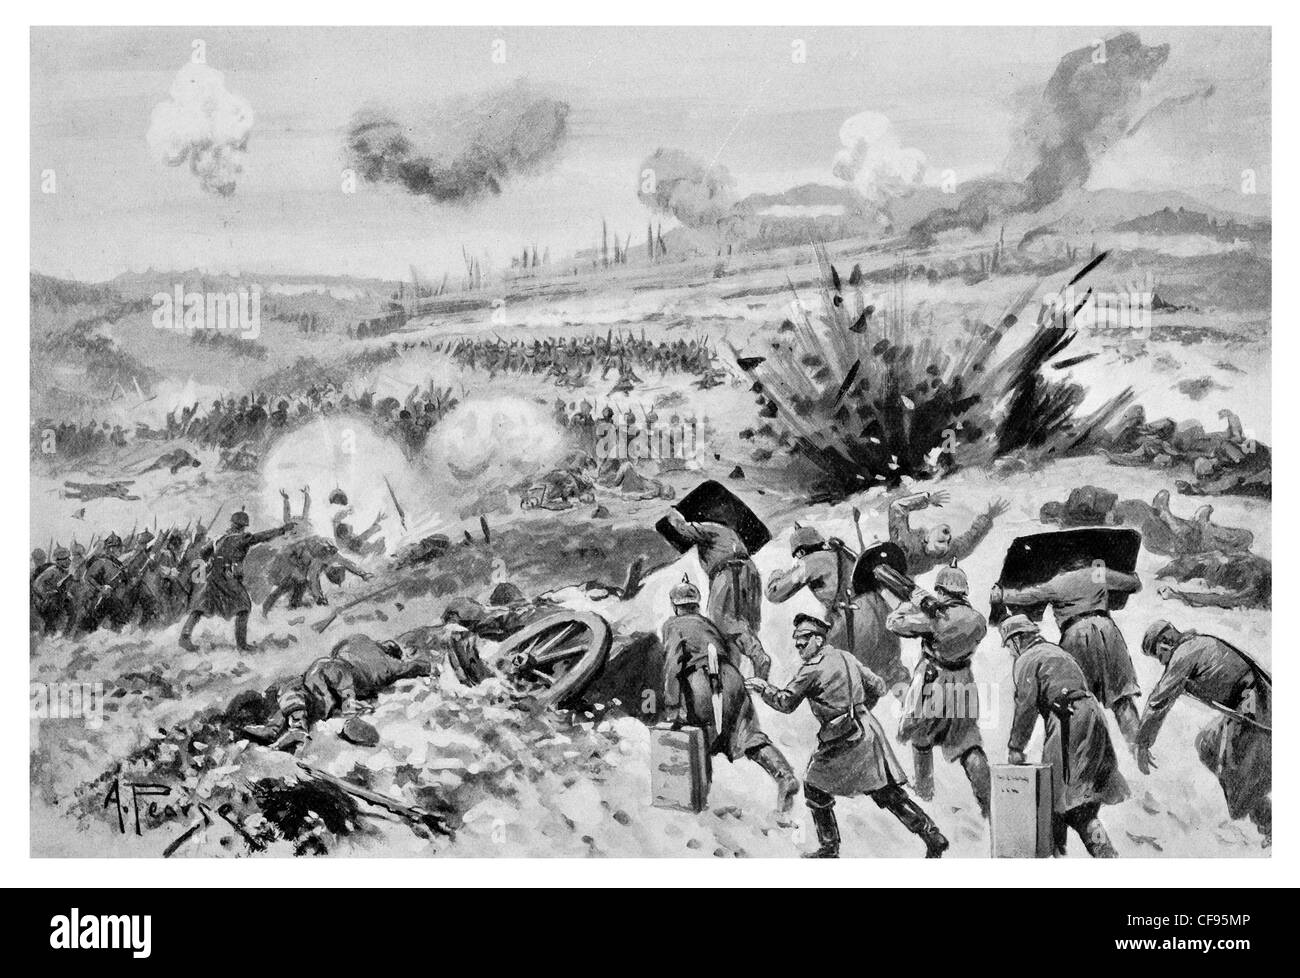 Battle of Verdun opening major battle German and French armies Western Front hilly terrain Stock Photo